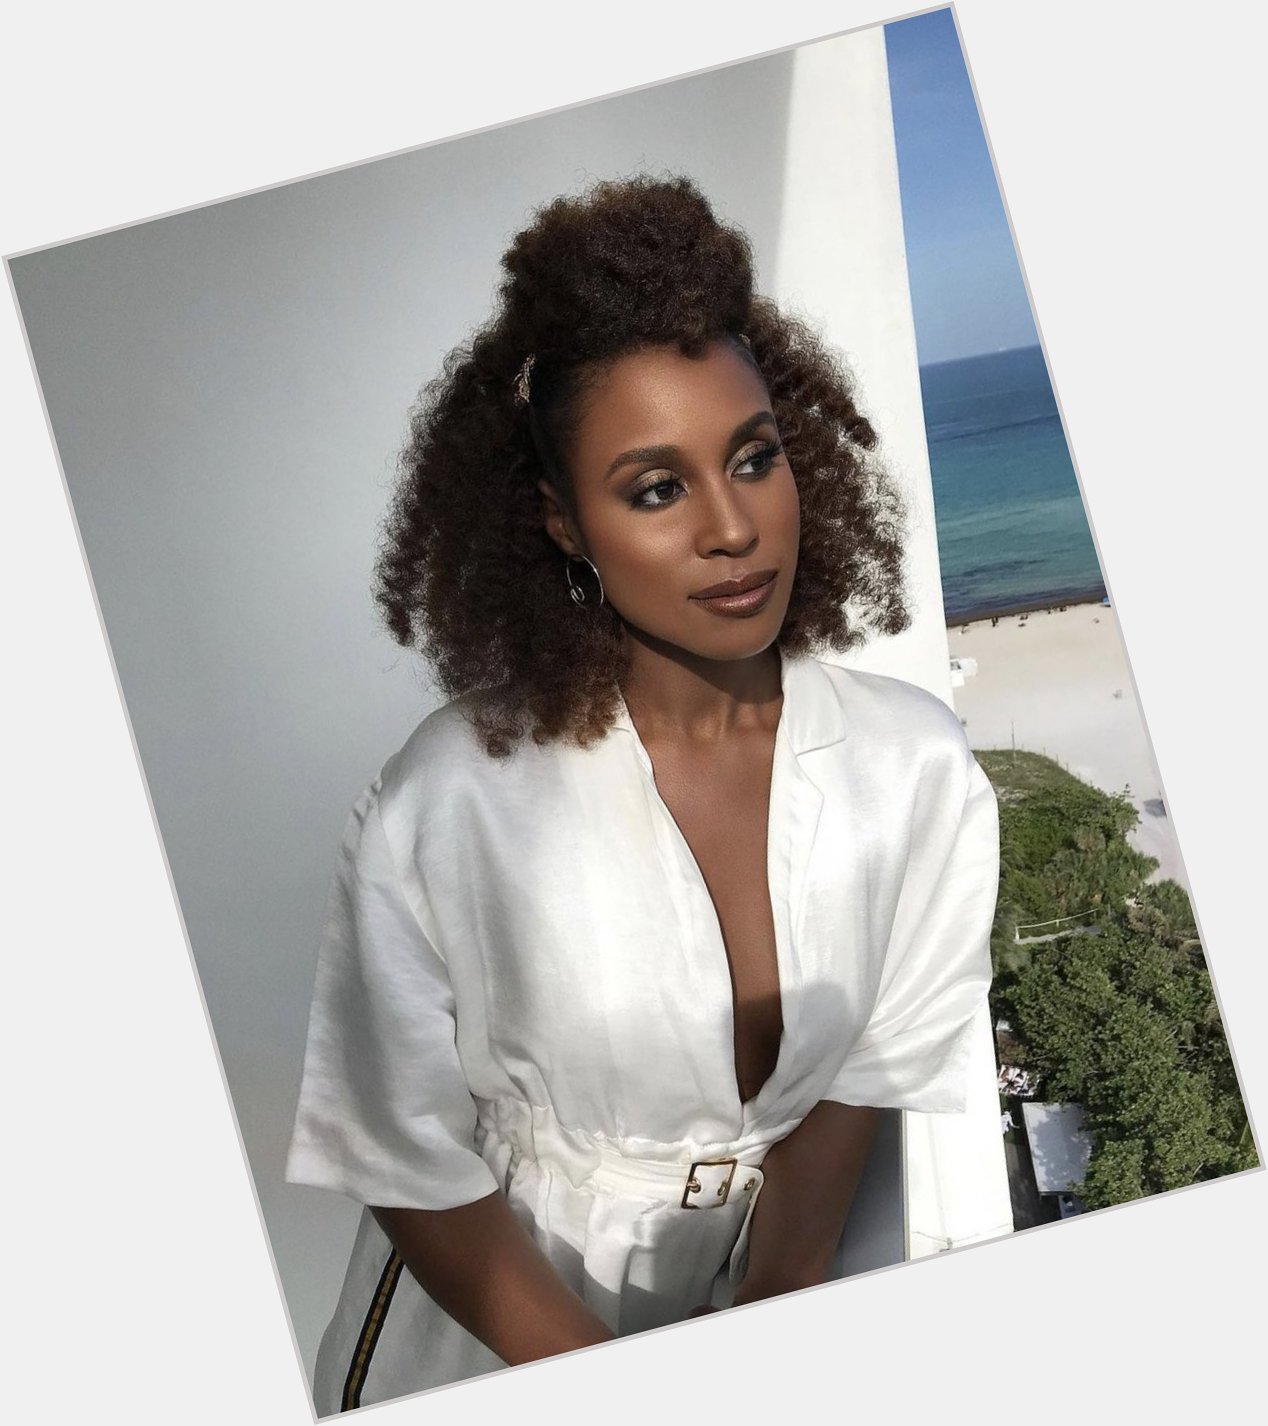 Issa Rae is my wedding hair inspiration model. 

Happy birthday and big love to her  